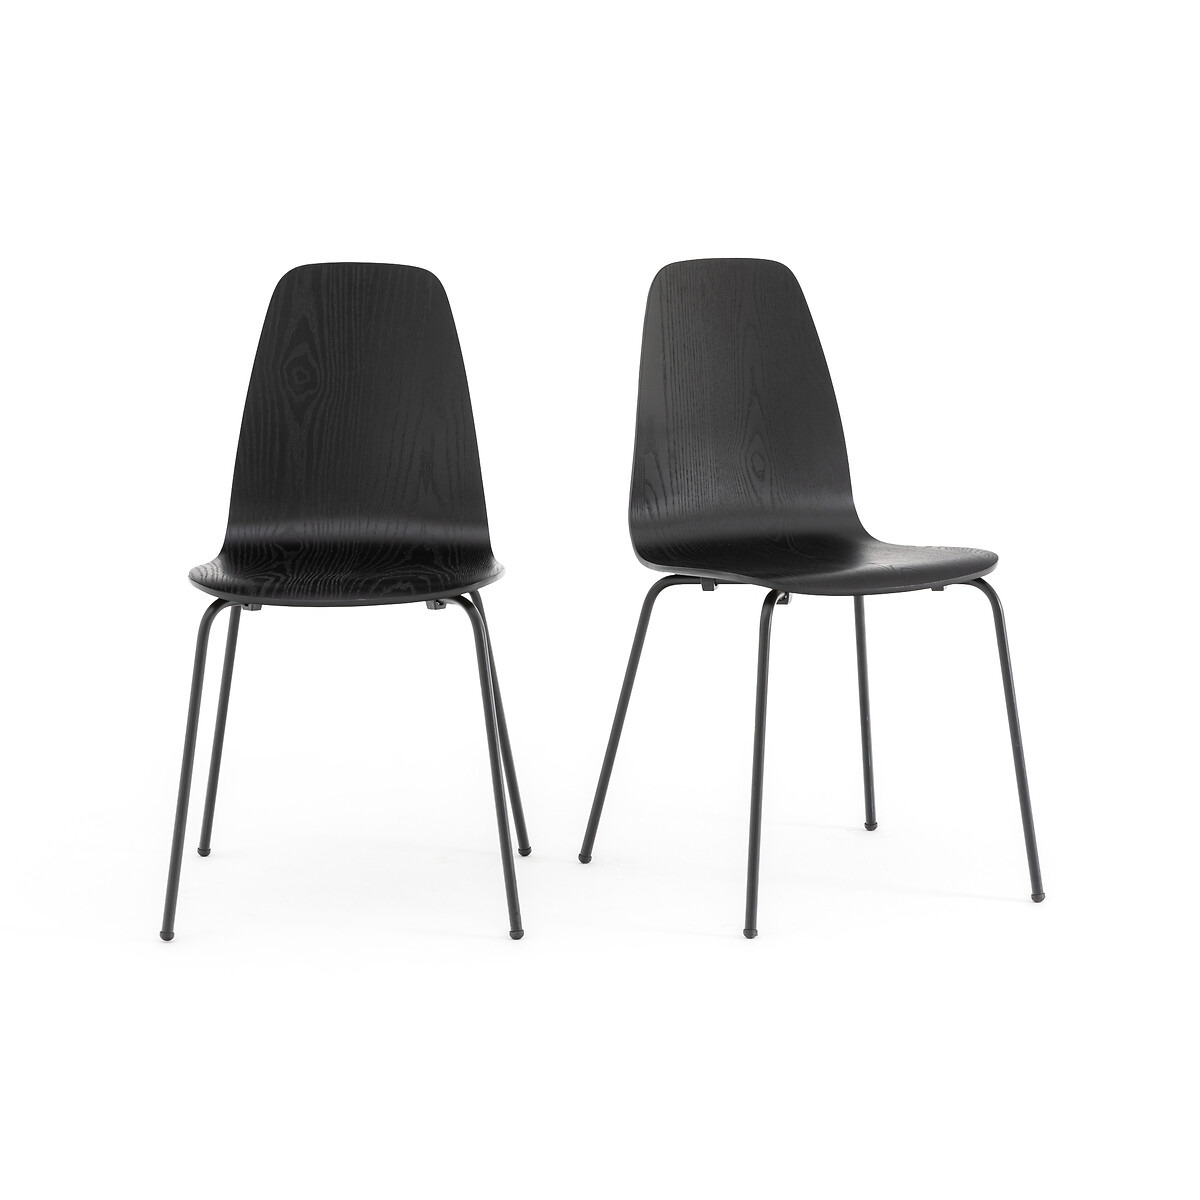 Set of 2 Biface Vintage-Style Chairs - image 1